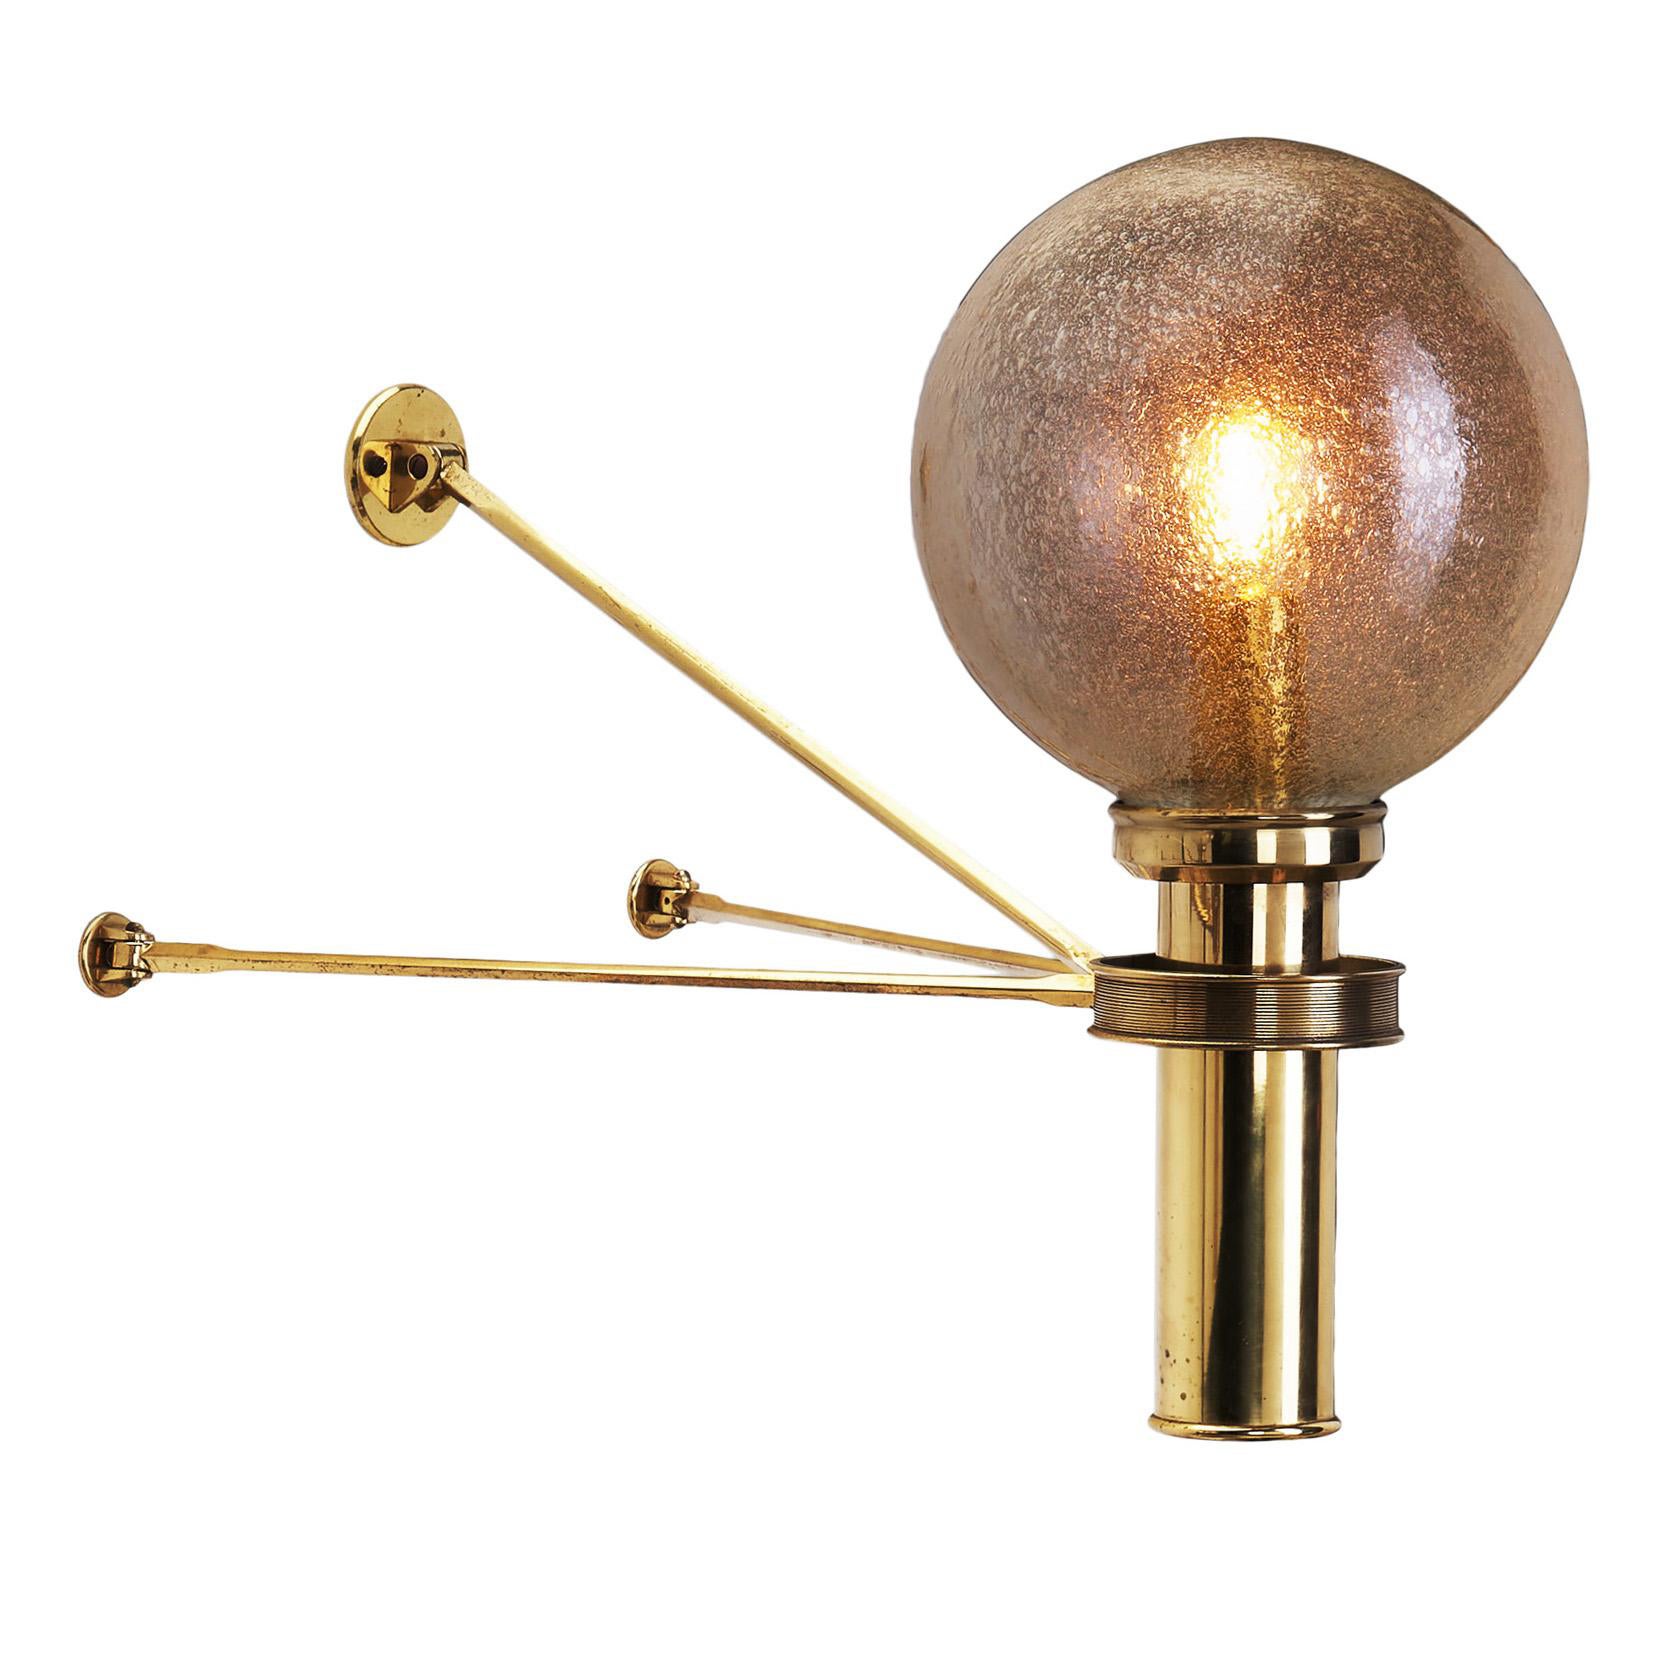 Large European Modern Wall Sconce in Brass & Bubble Glass, Europe circa 1950s